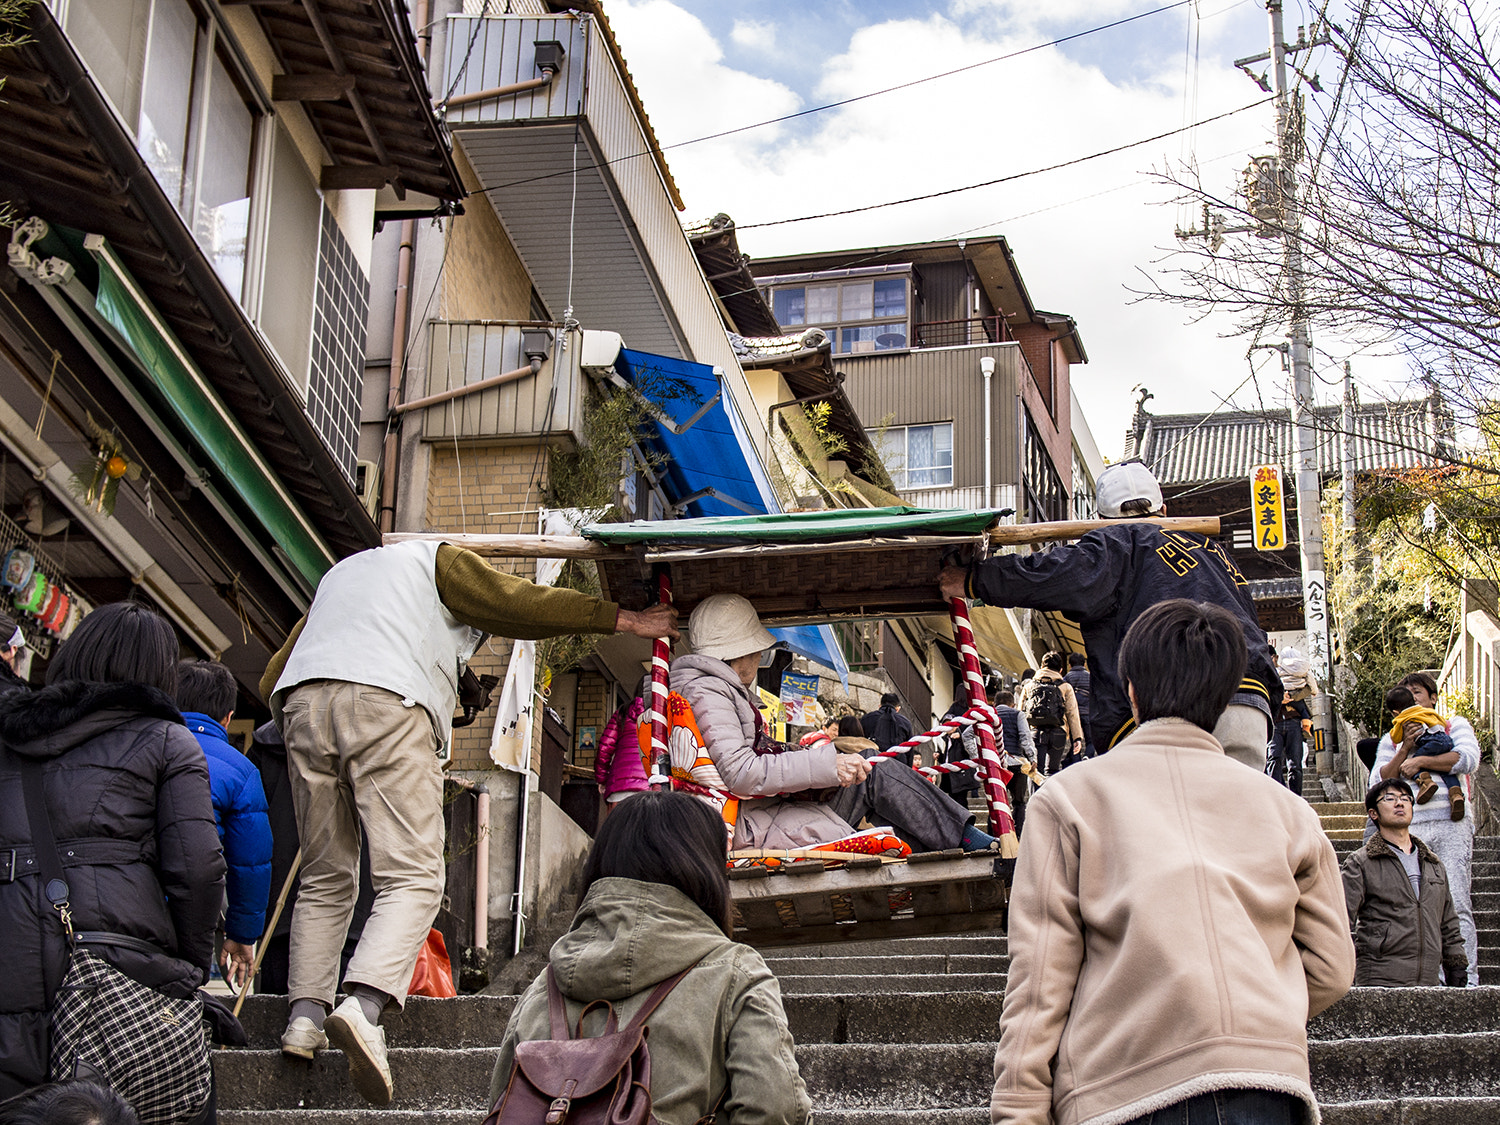 Olympus PEN E-PL5 sample photo. Go to the mt. konpira shrine with a basket photography